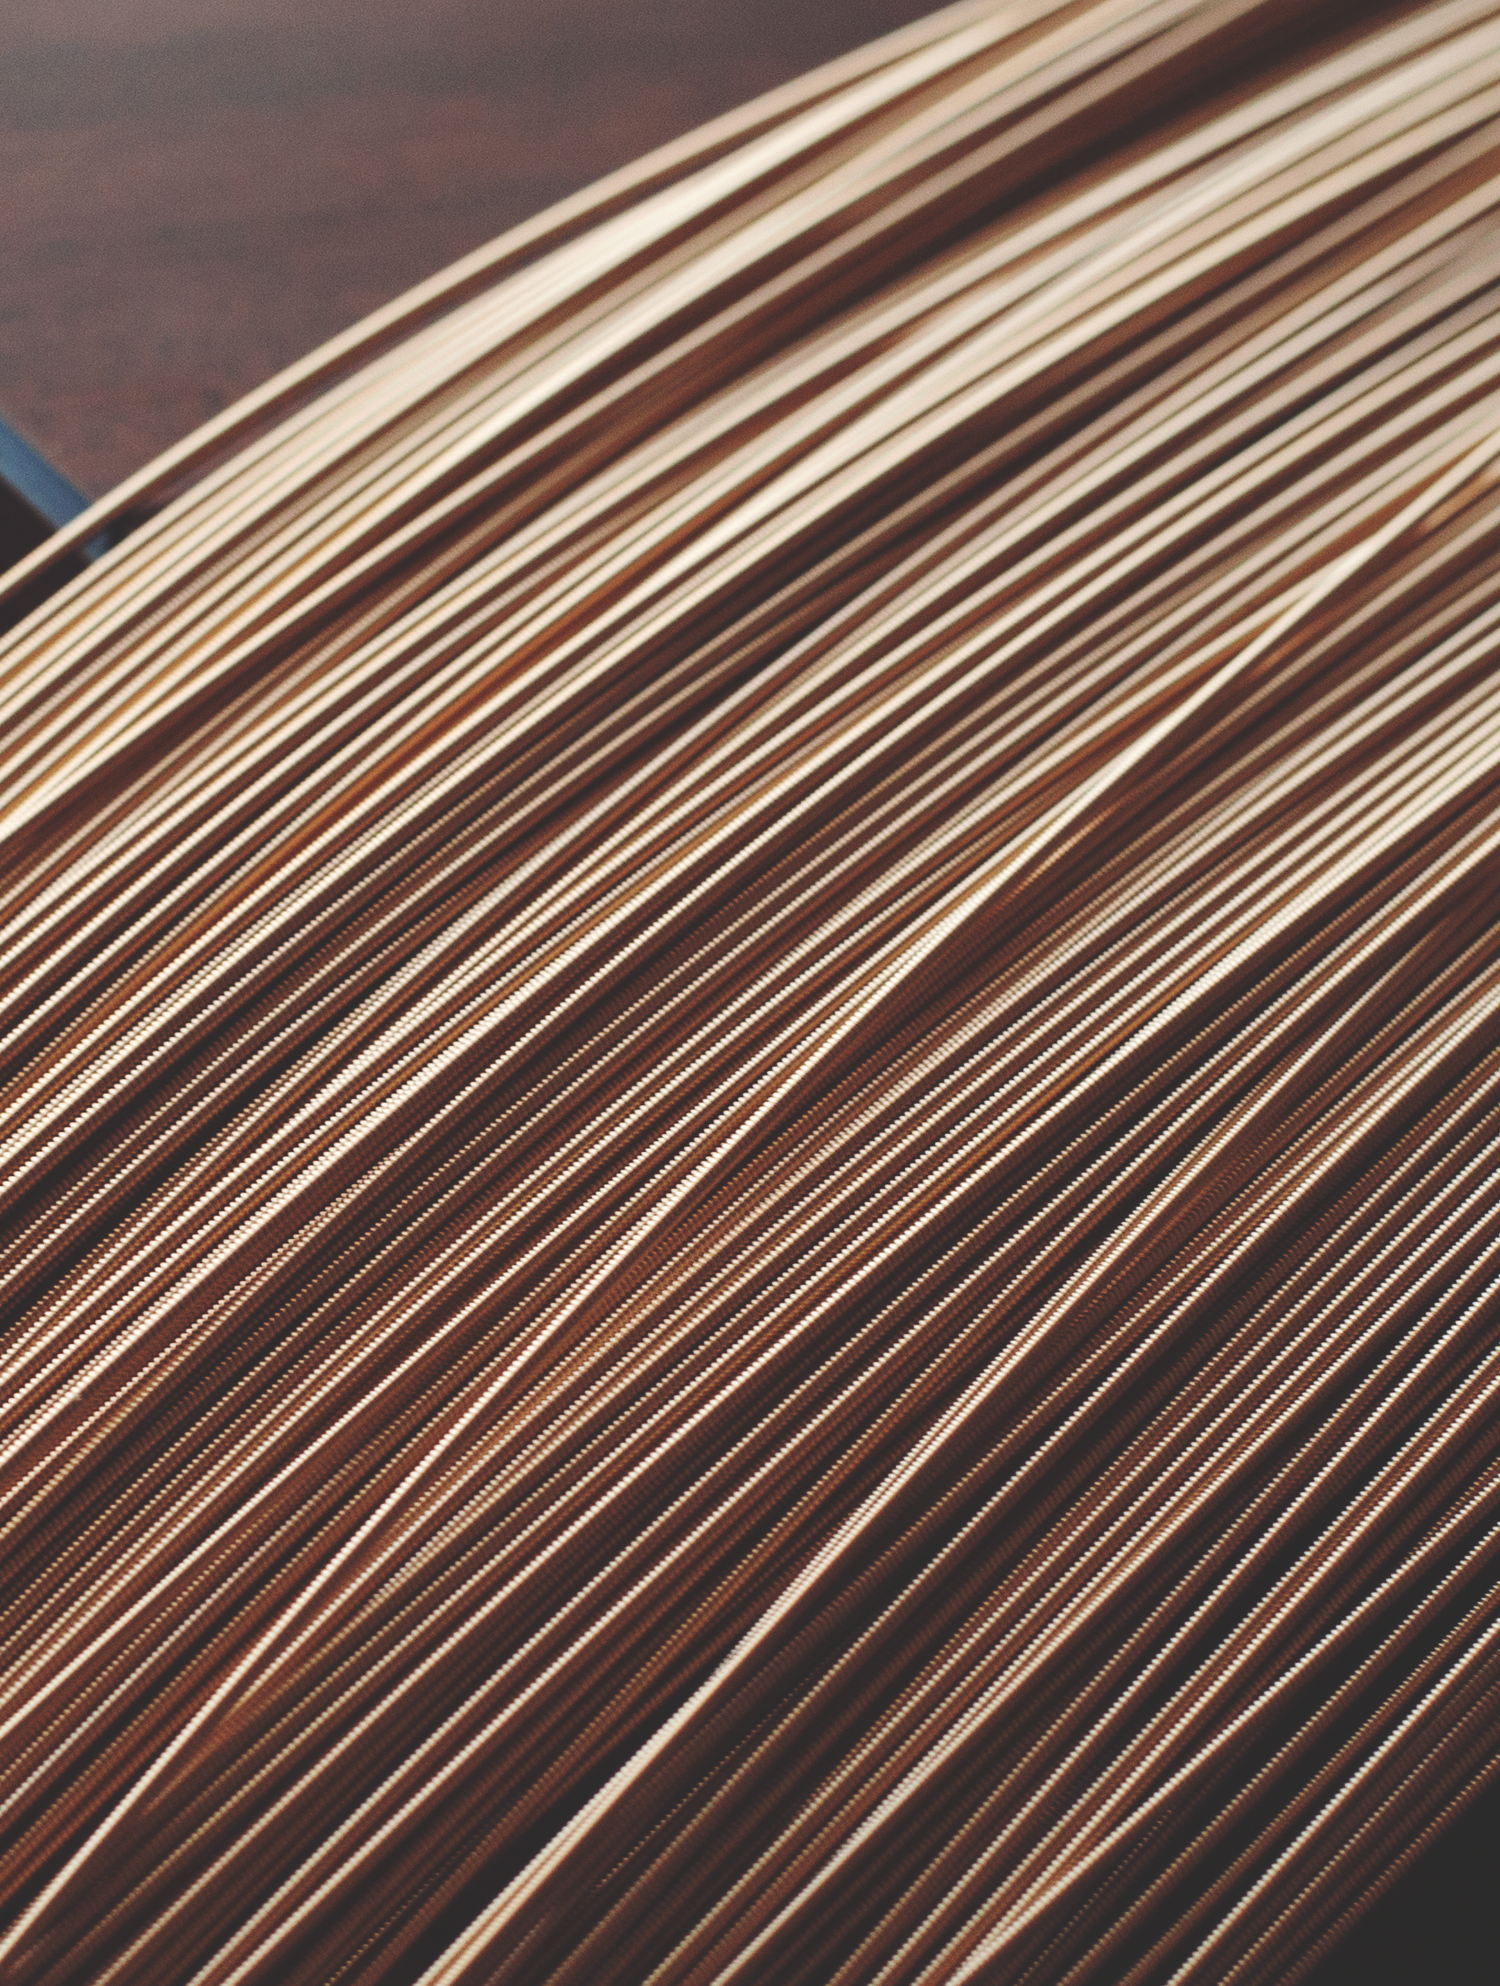 section shot of hundred of coiled phosphor bronze acoustic guitar strings